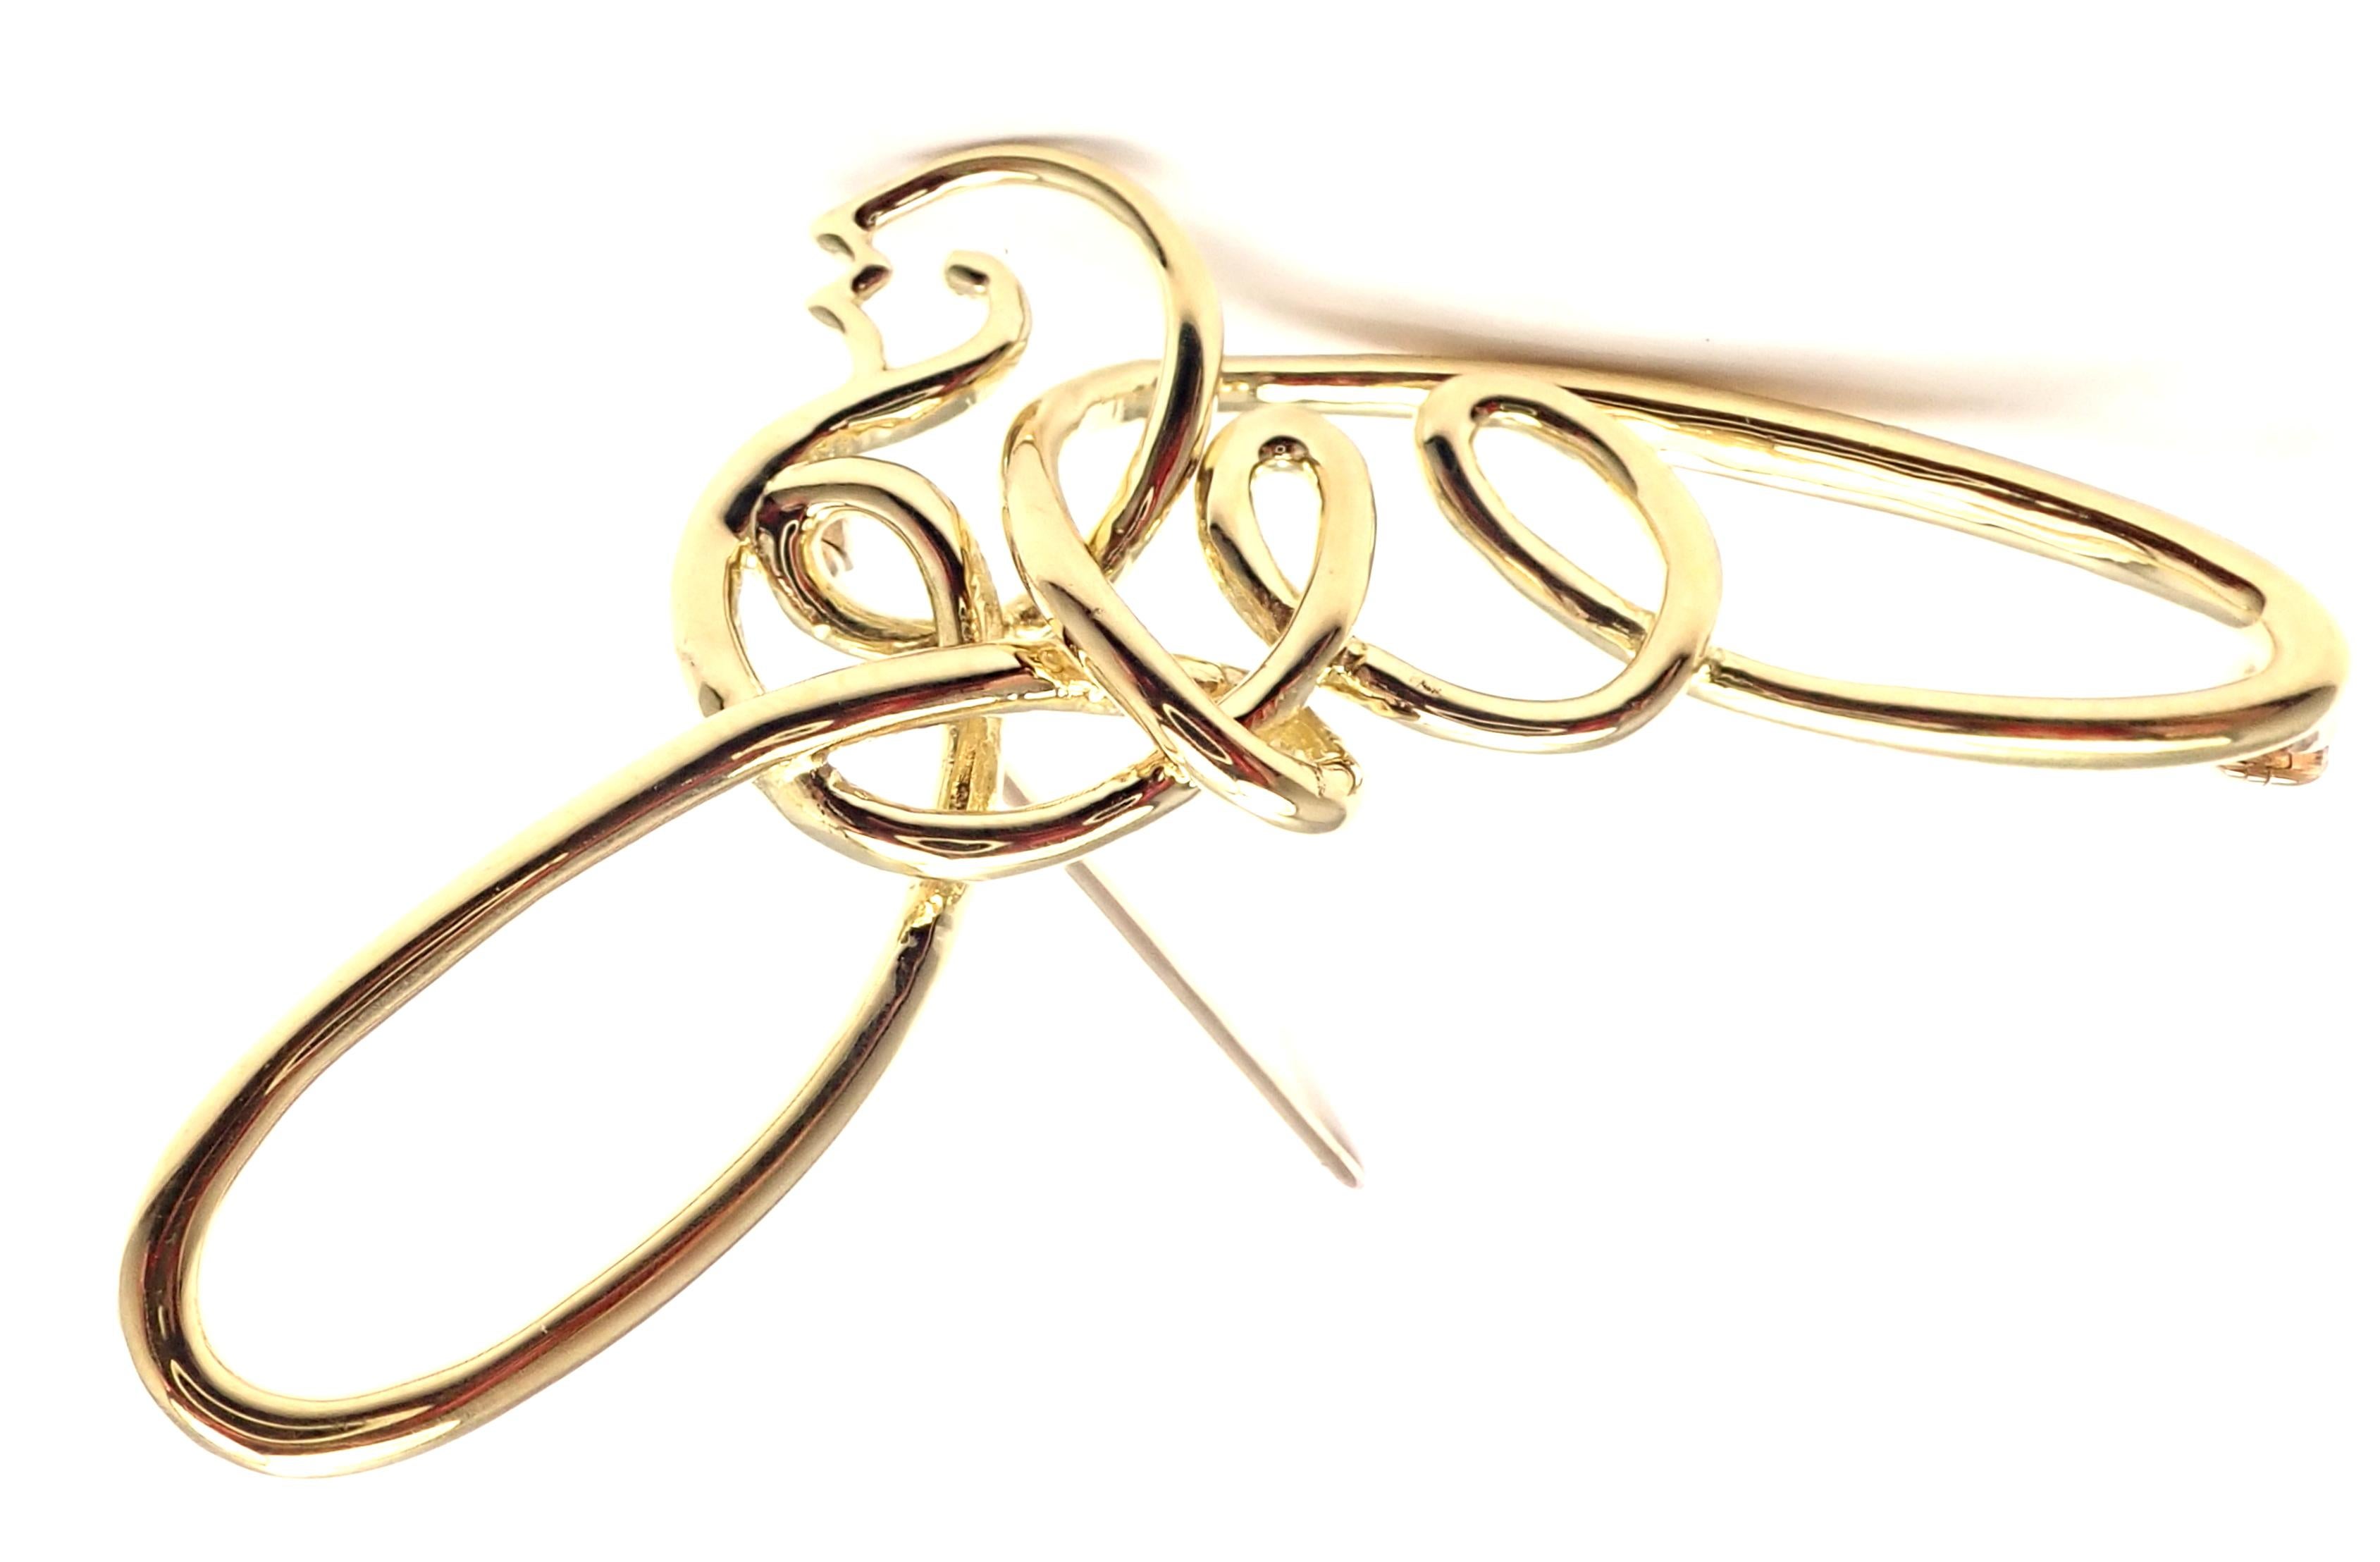 18k Yellow Gold Dove Brooch Pin by Paloma Picasso for Tiffany & Co. 
Details: 
Measurements: 2